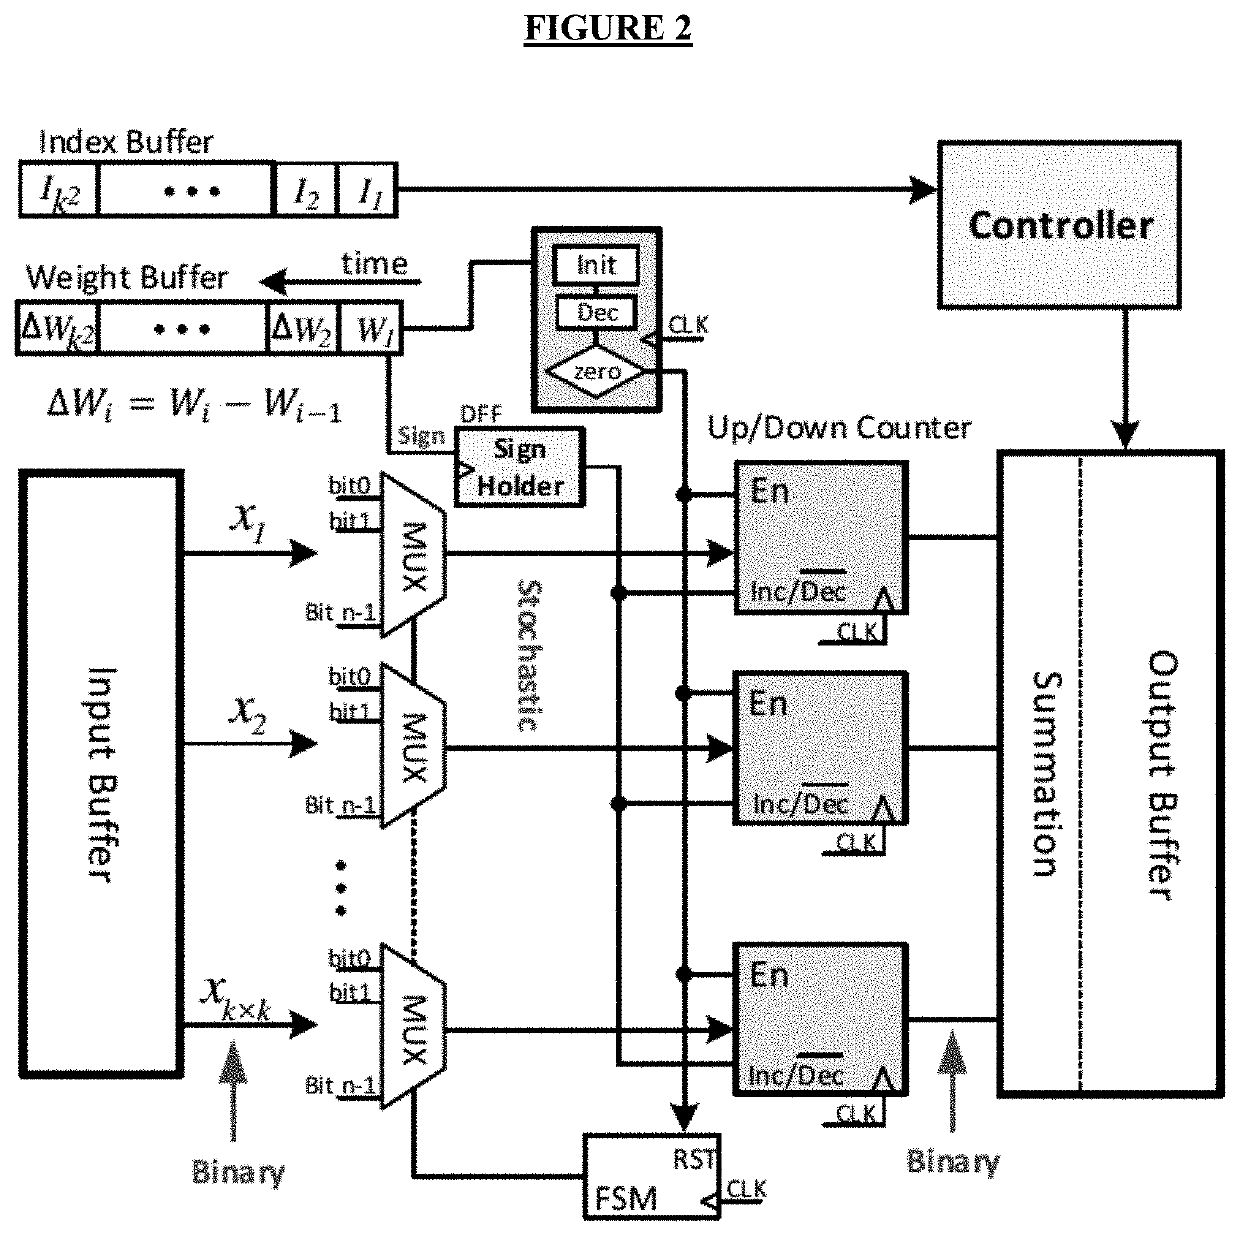 Embedded stochastic-computing accelerator architecture and method for convolutional neural networks